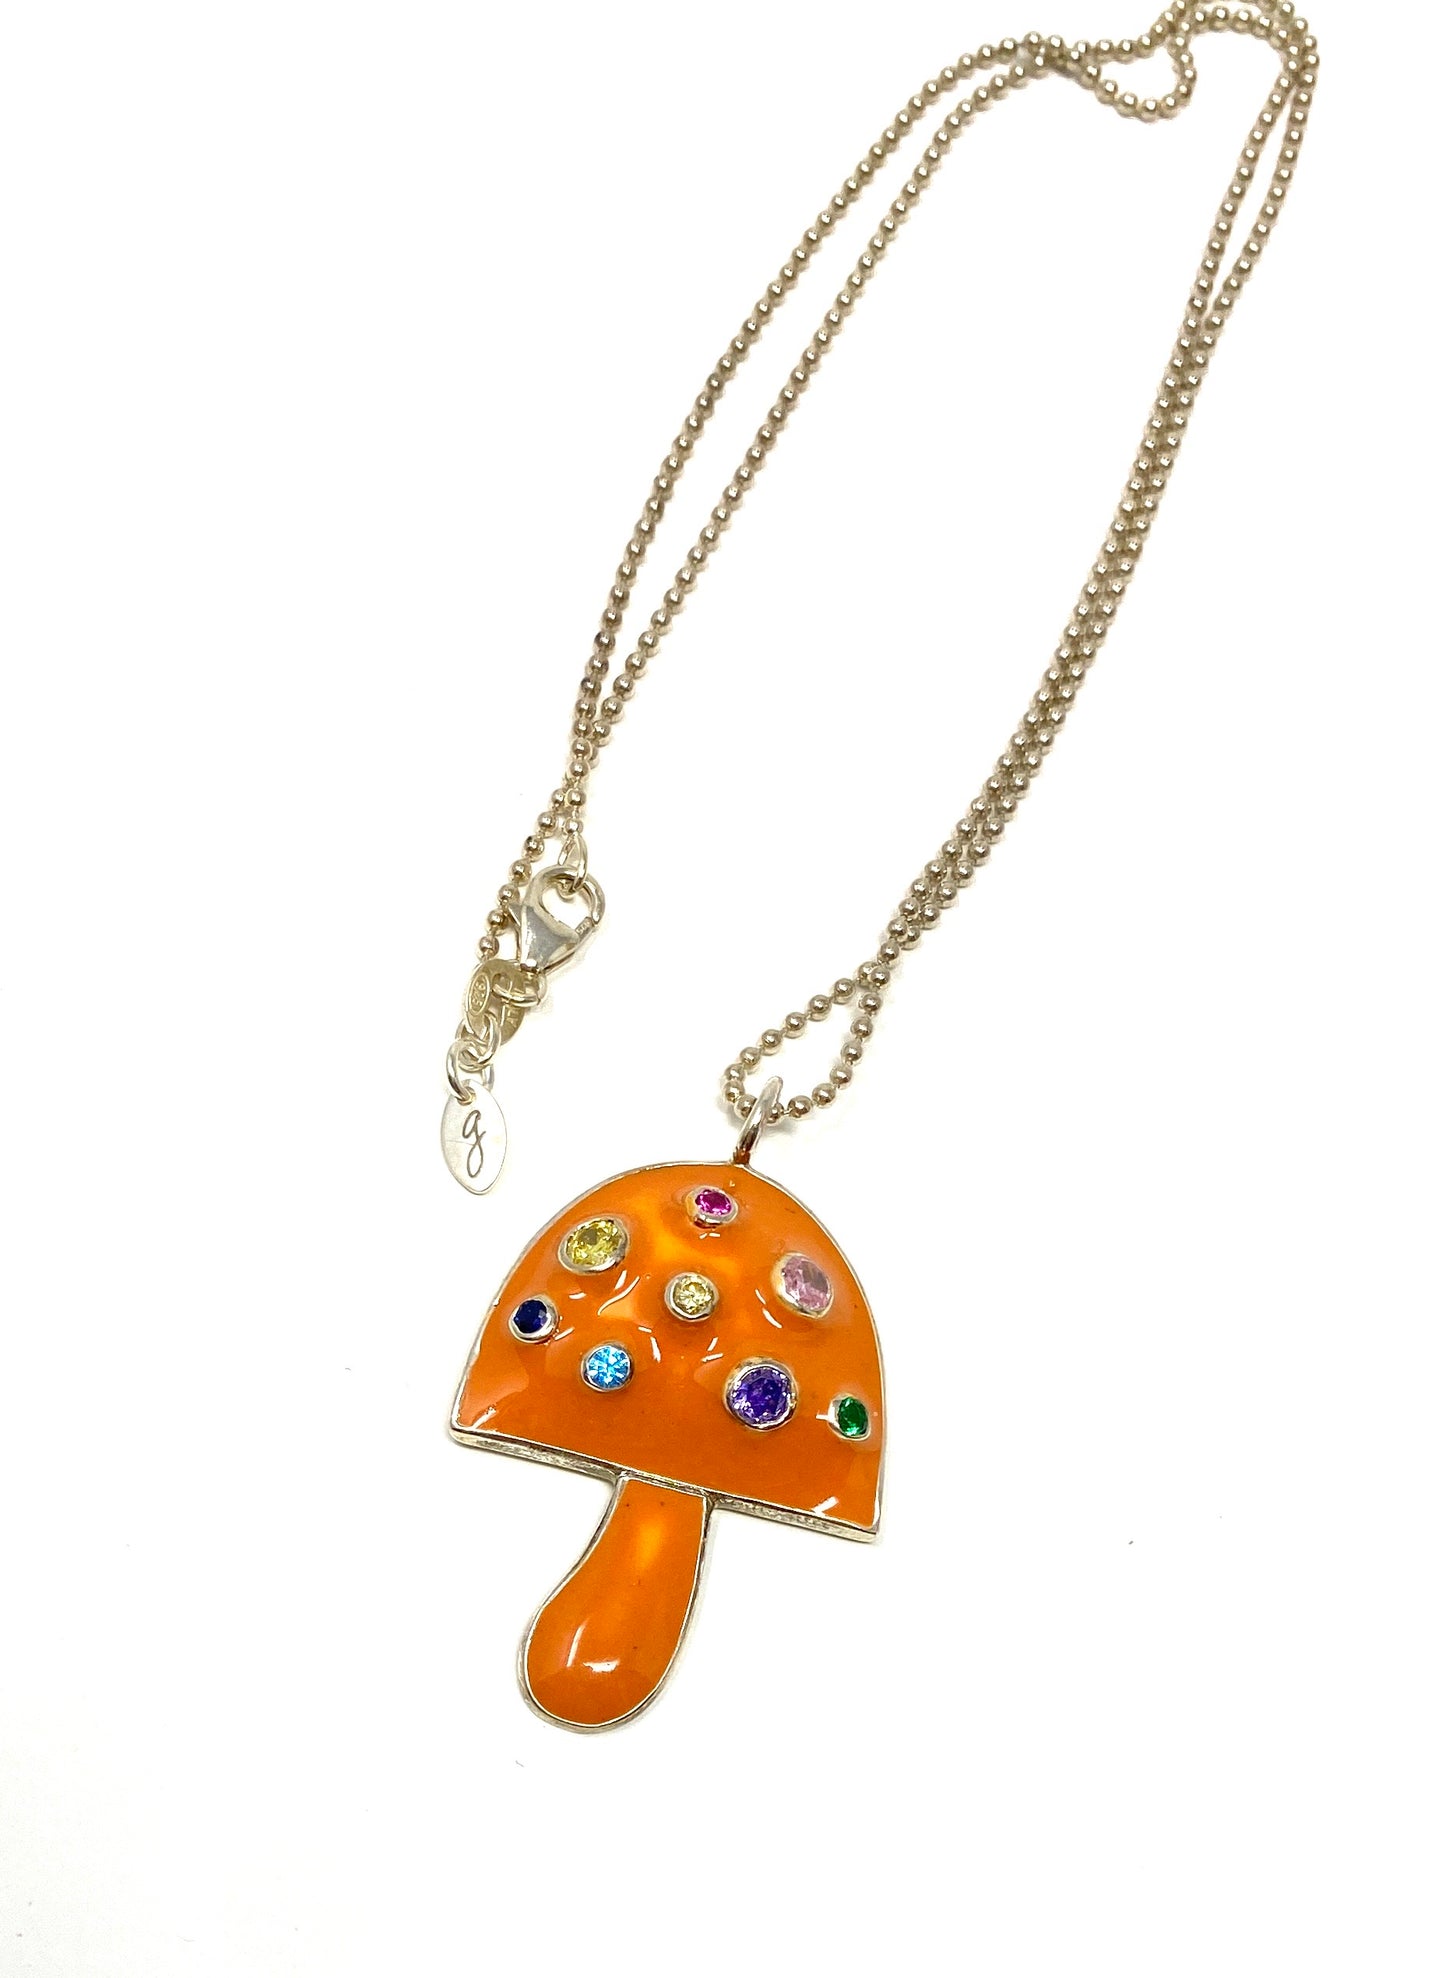 Orange Enamel Mushroom Pendant With Variety of Gemstones on Sterling Silver Ball Chain Necklace